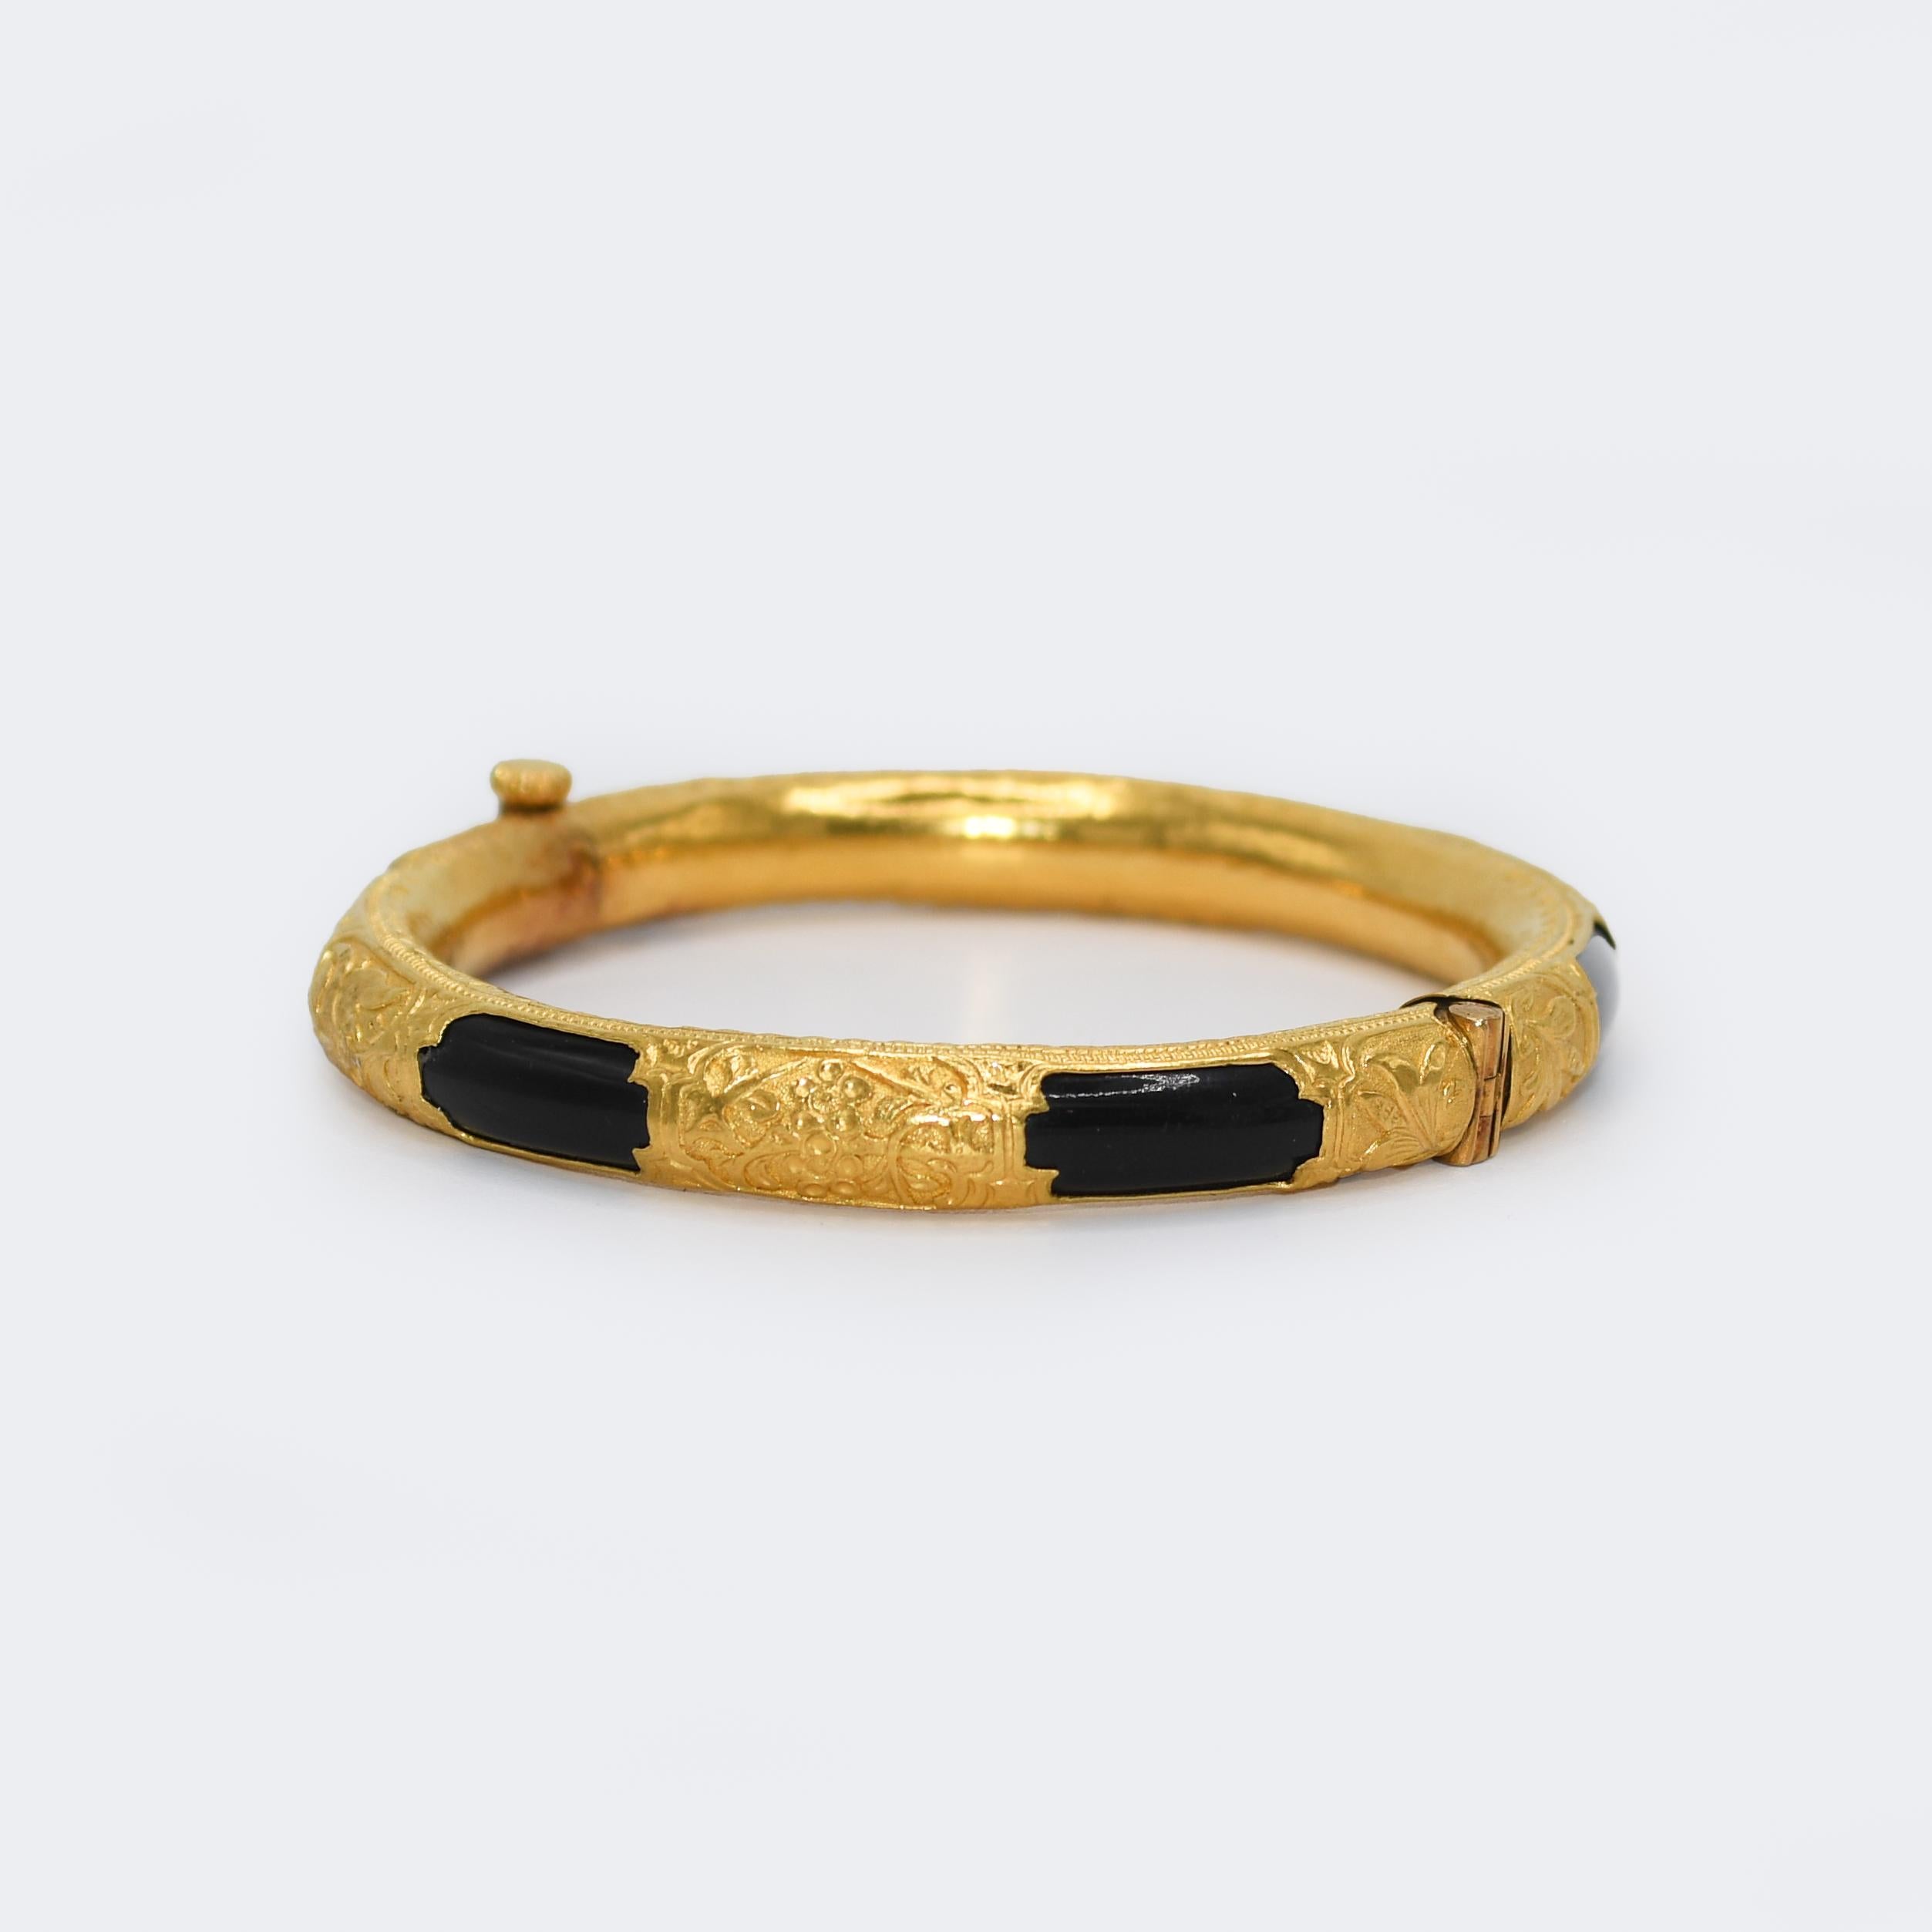 22k Yellow Gold & Onyx Bangle
Weighs 23 grams and measures 7